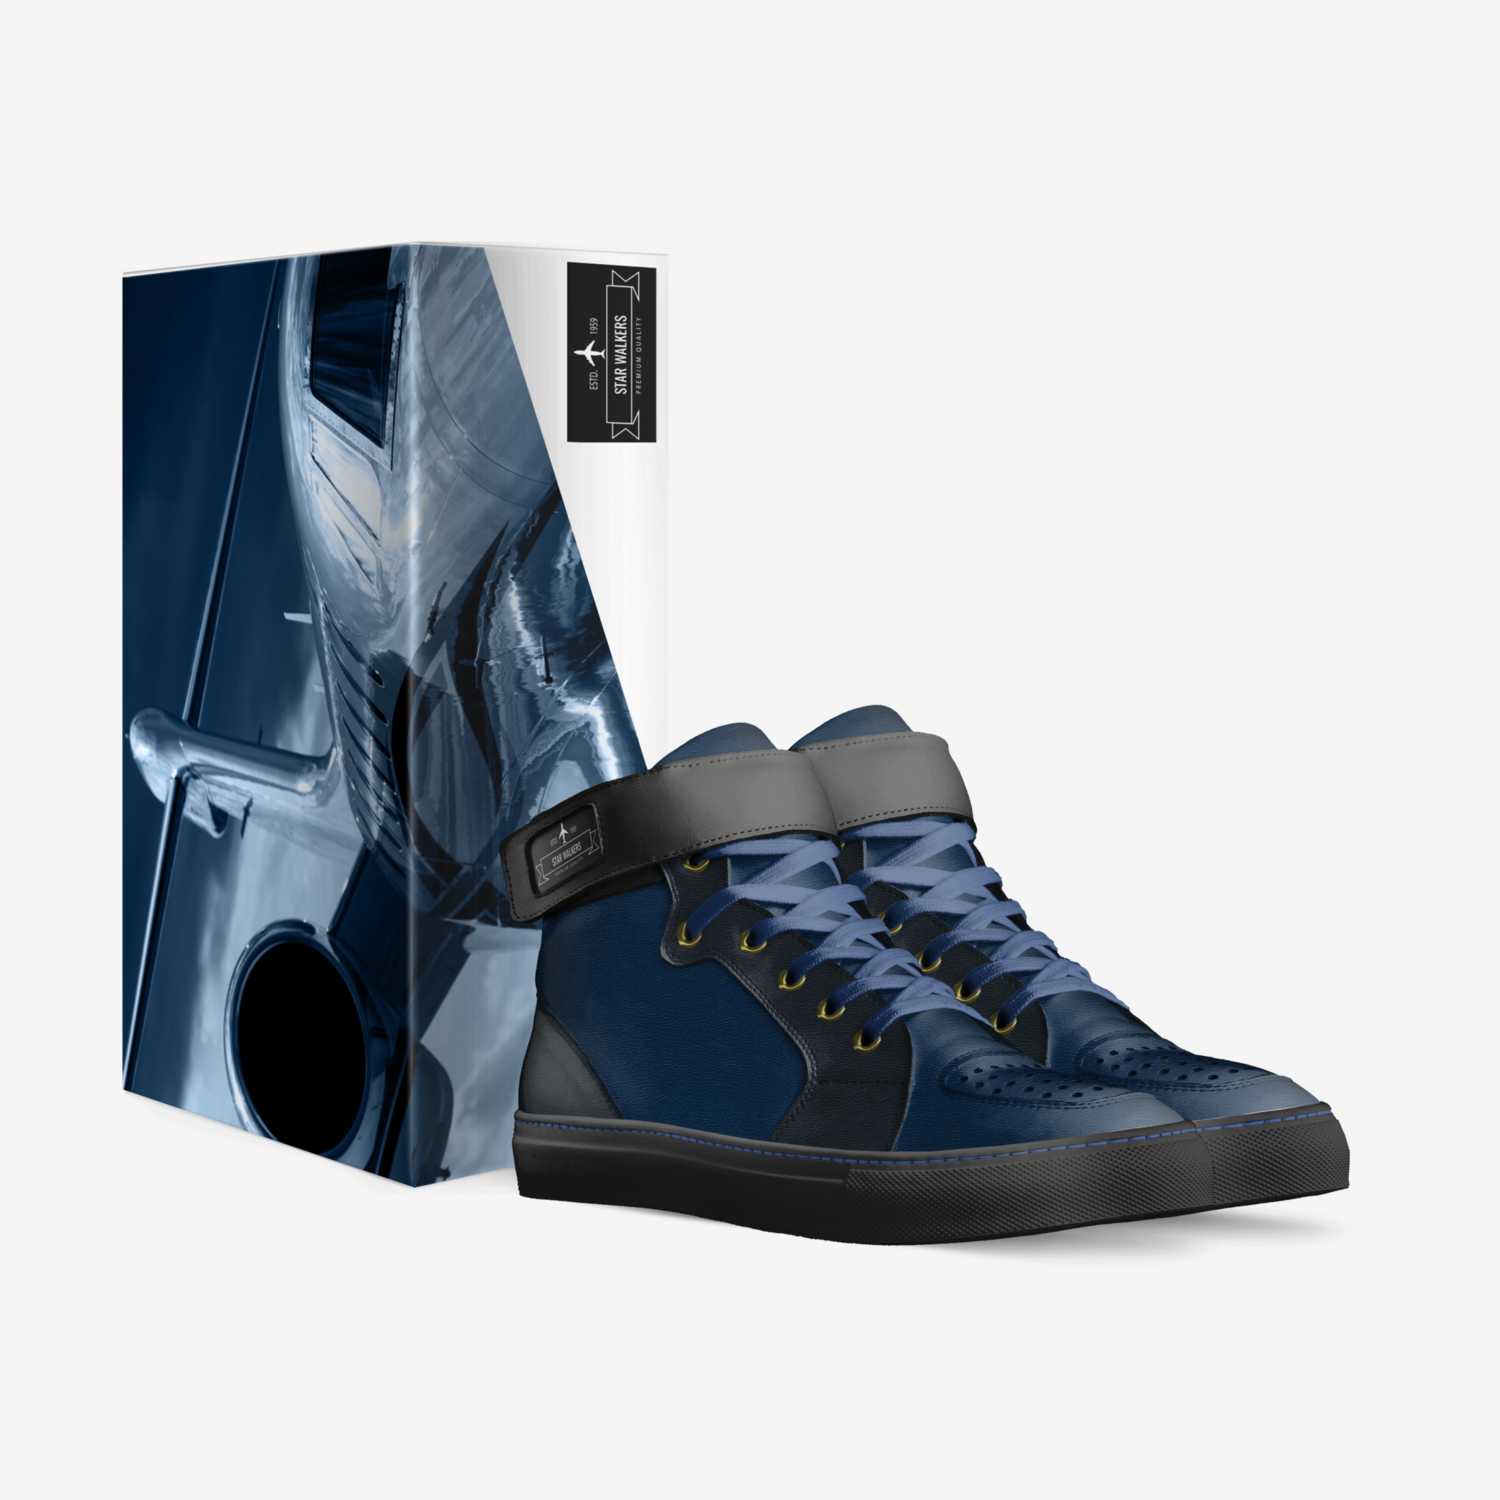 Star walkers custom made in Italy shoes by Jakob Greer | Box view